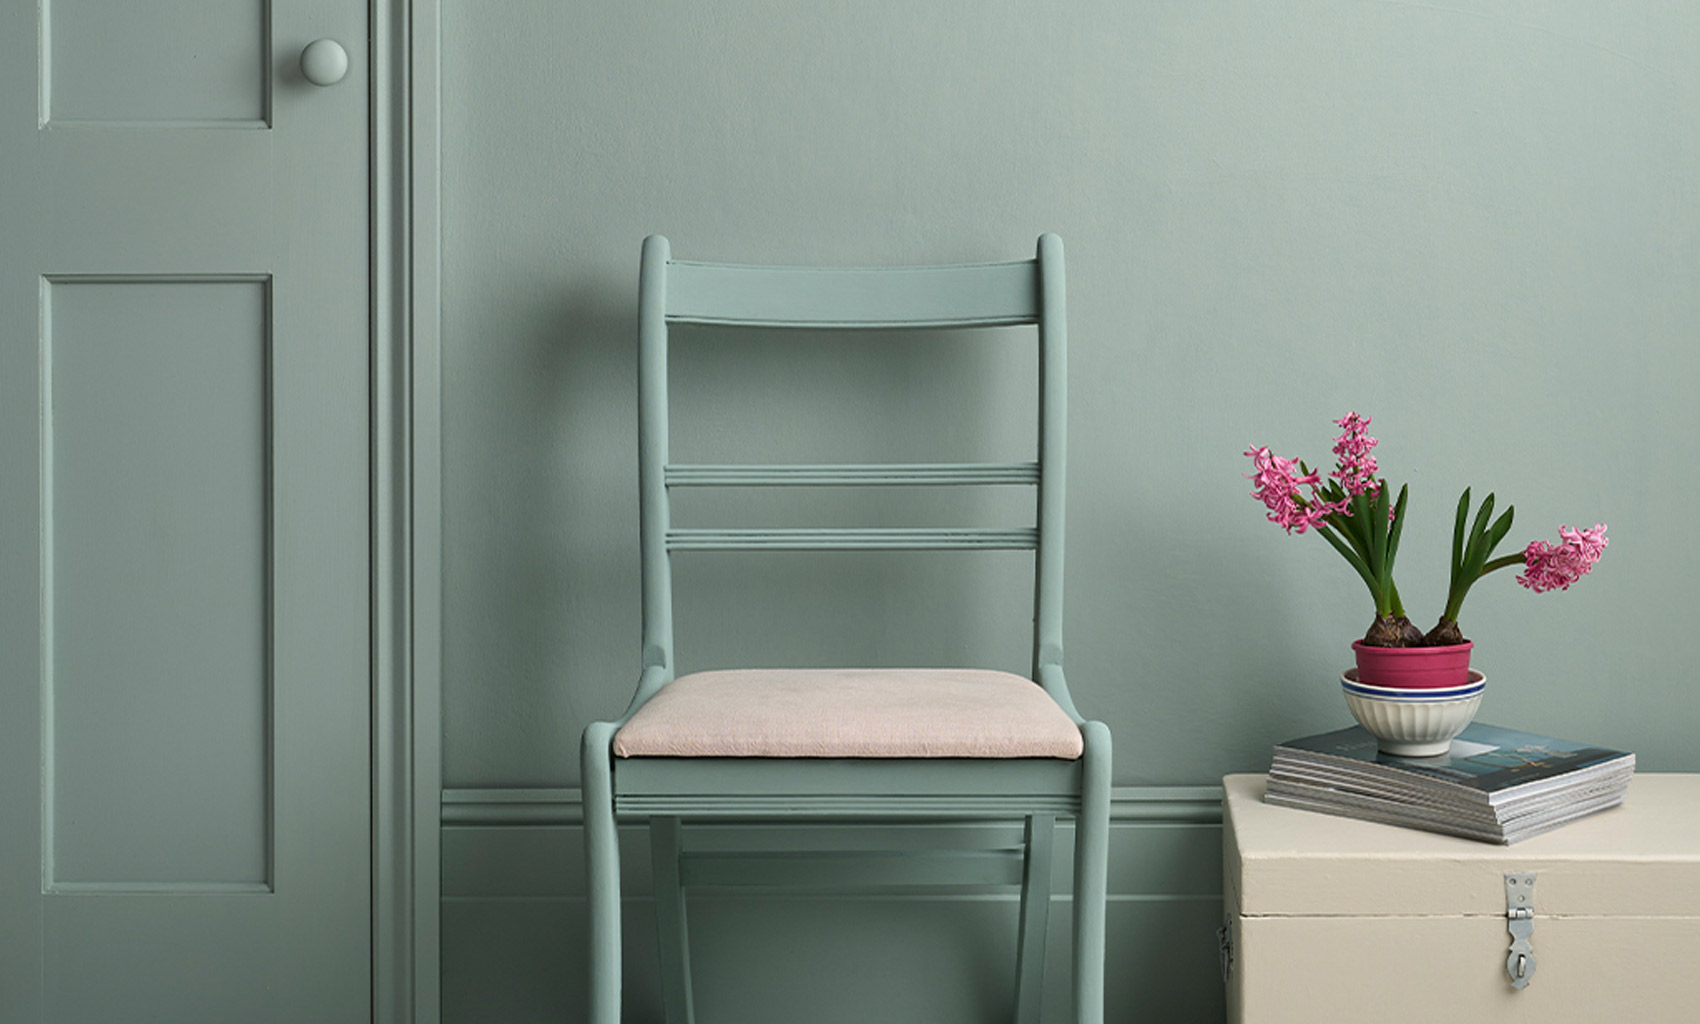 Lifestyle Image of Annie Sloan Satin Paint in Pemberley Blue used on door and skirting